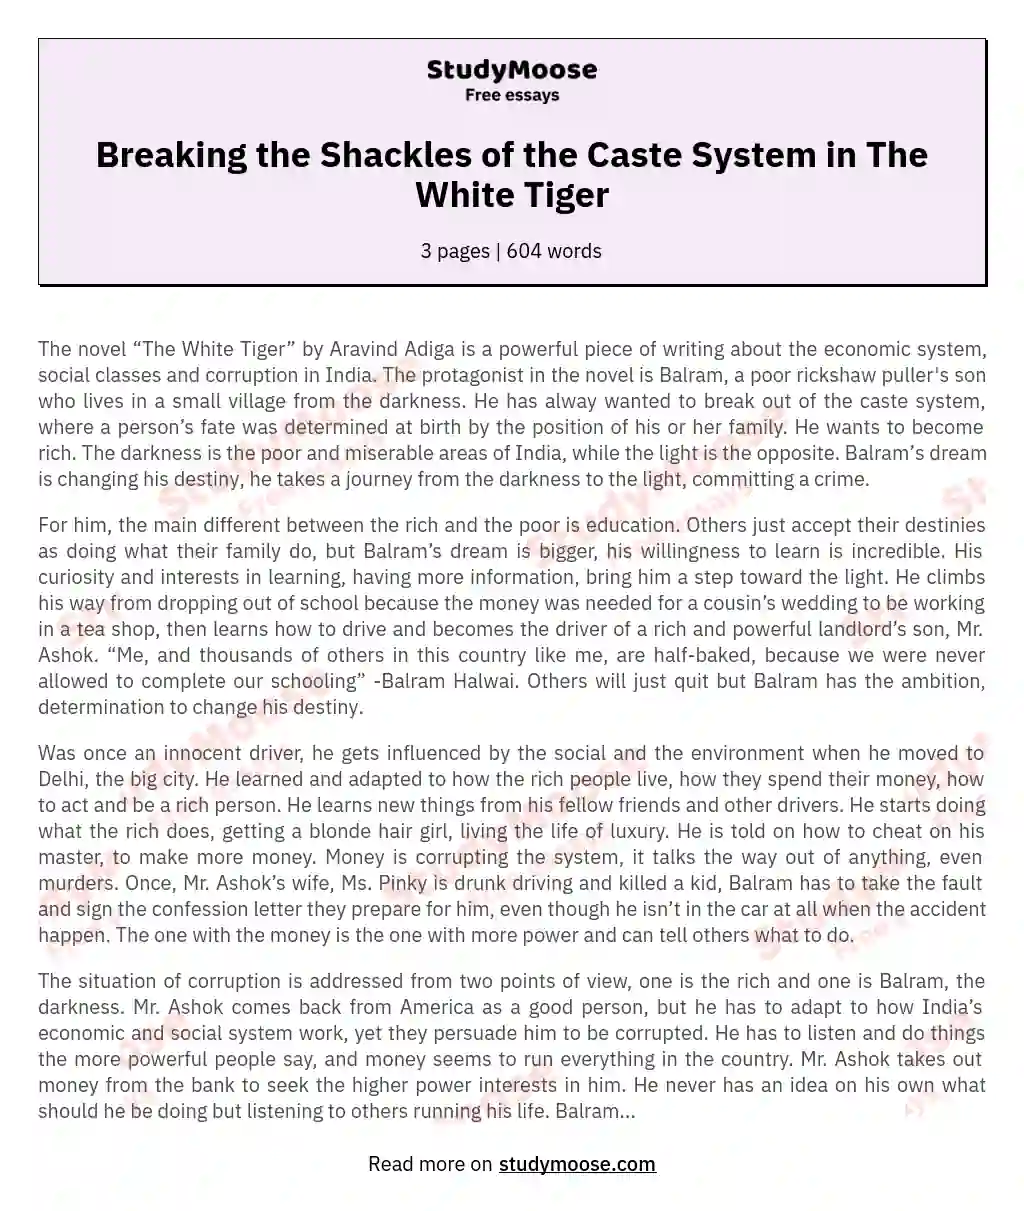 Breaking the Shackles of the Caste System in The White Tiger essay